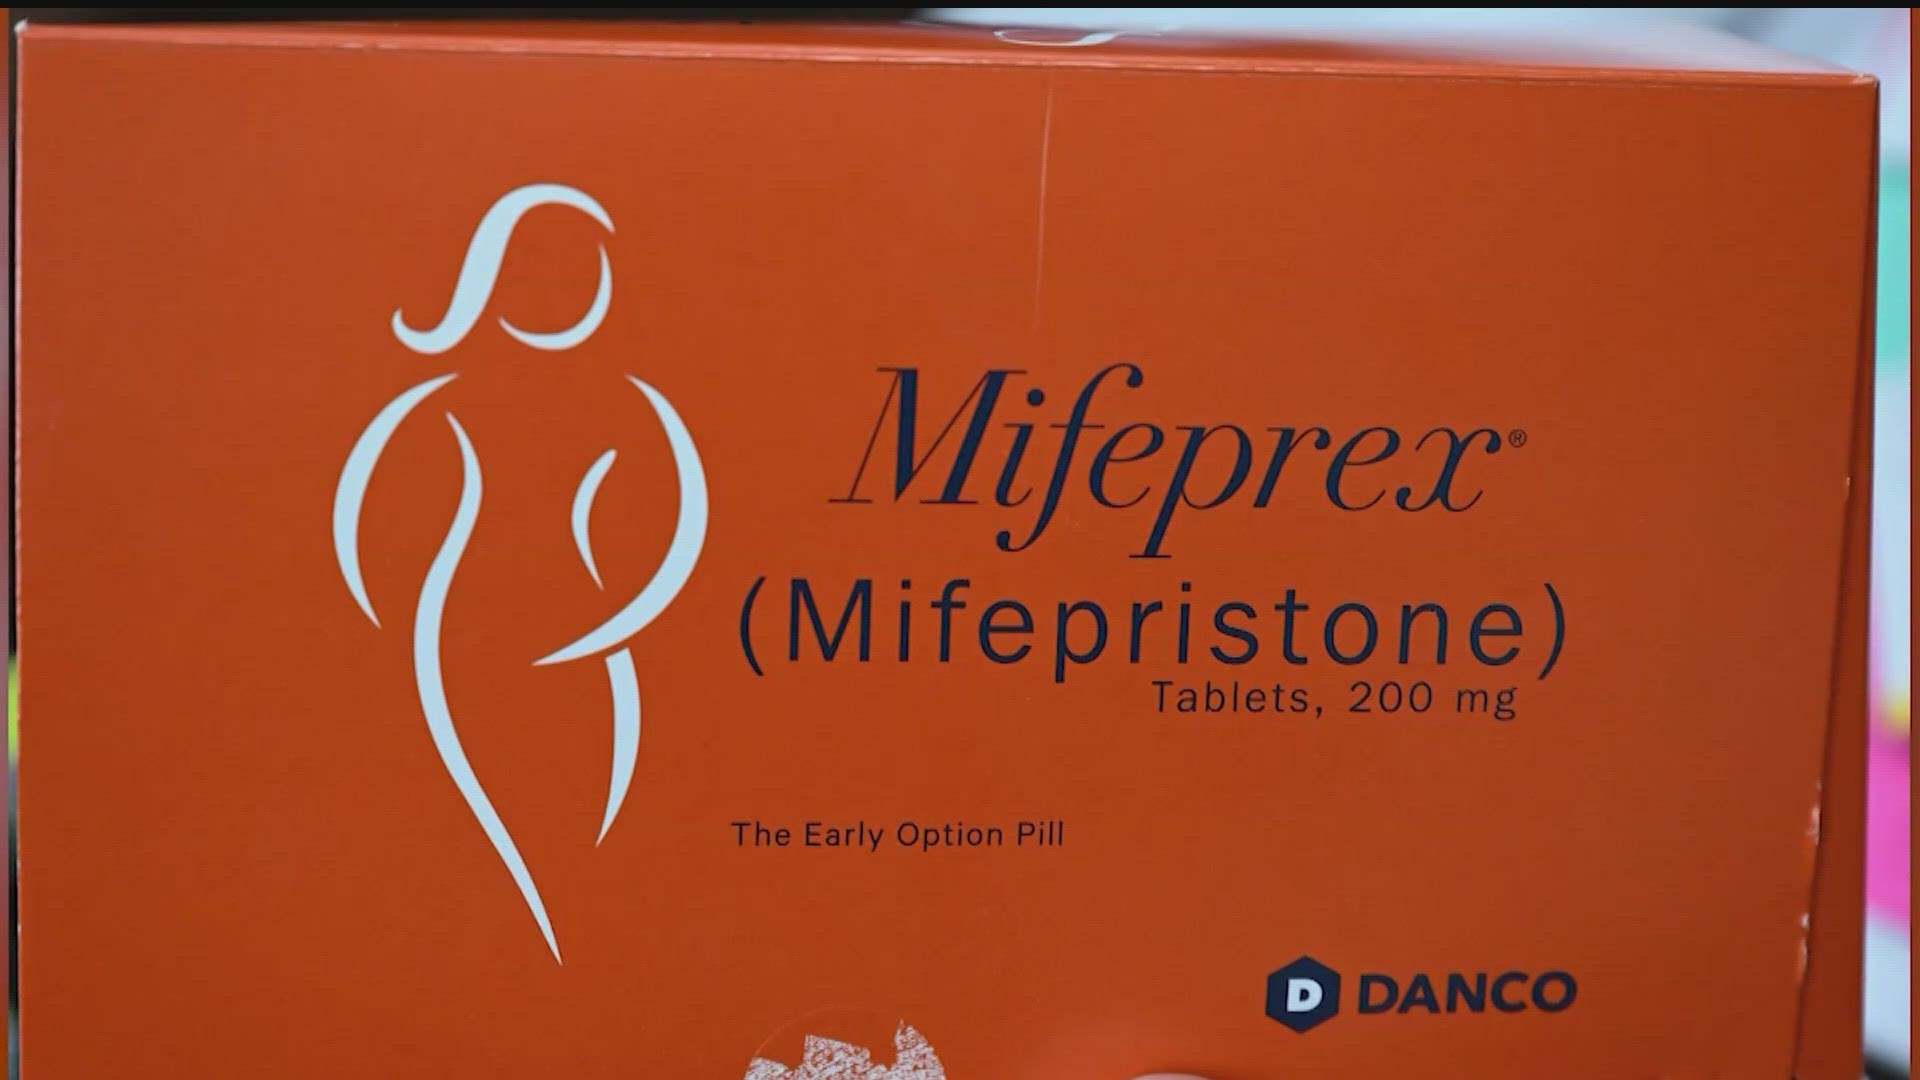 Mifepristone access appears to be heading to the U.S. Supreme Court, marking the first significant abortion case since Roe V. Wade was overturned.